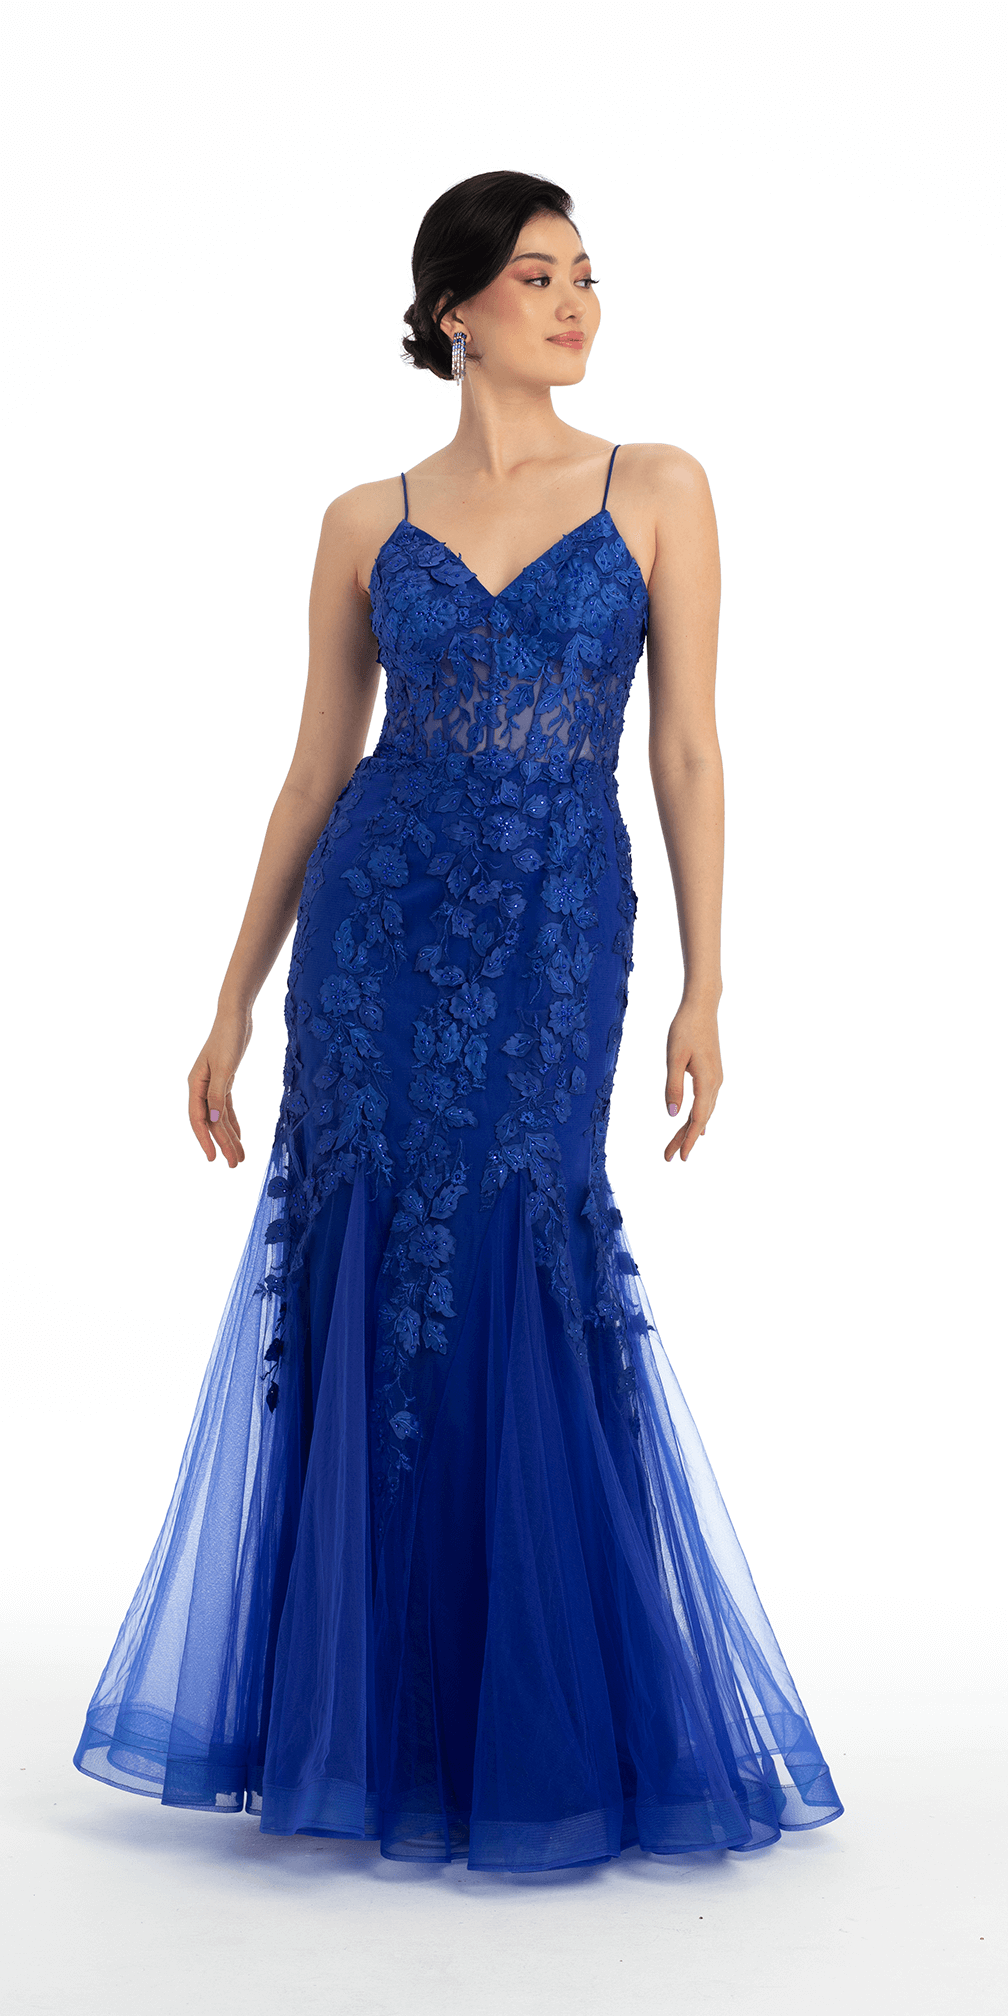 Camille La Vie Beaded Embroidered Mesh Lace Trumpet Dress with Godets missy / 0 / royal-blue